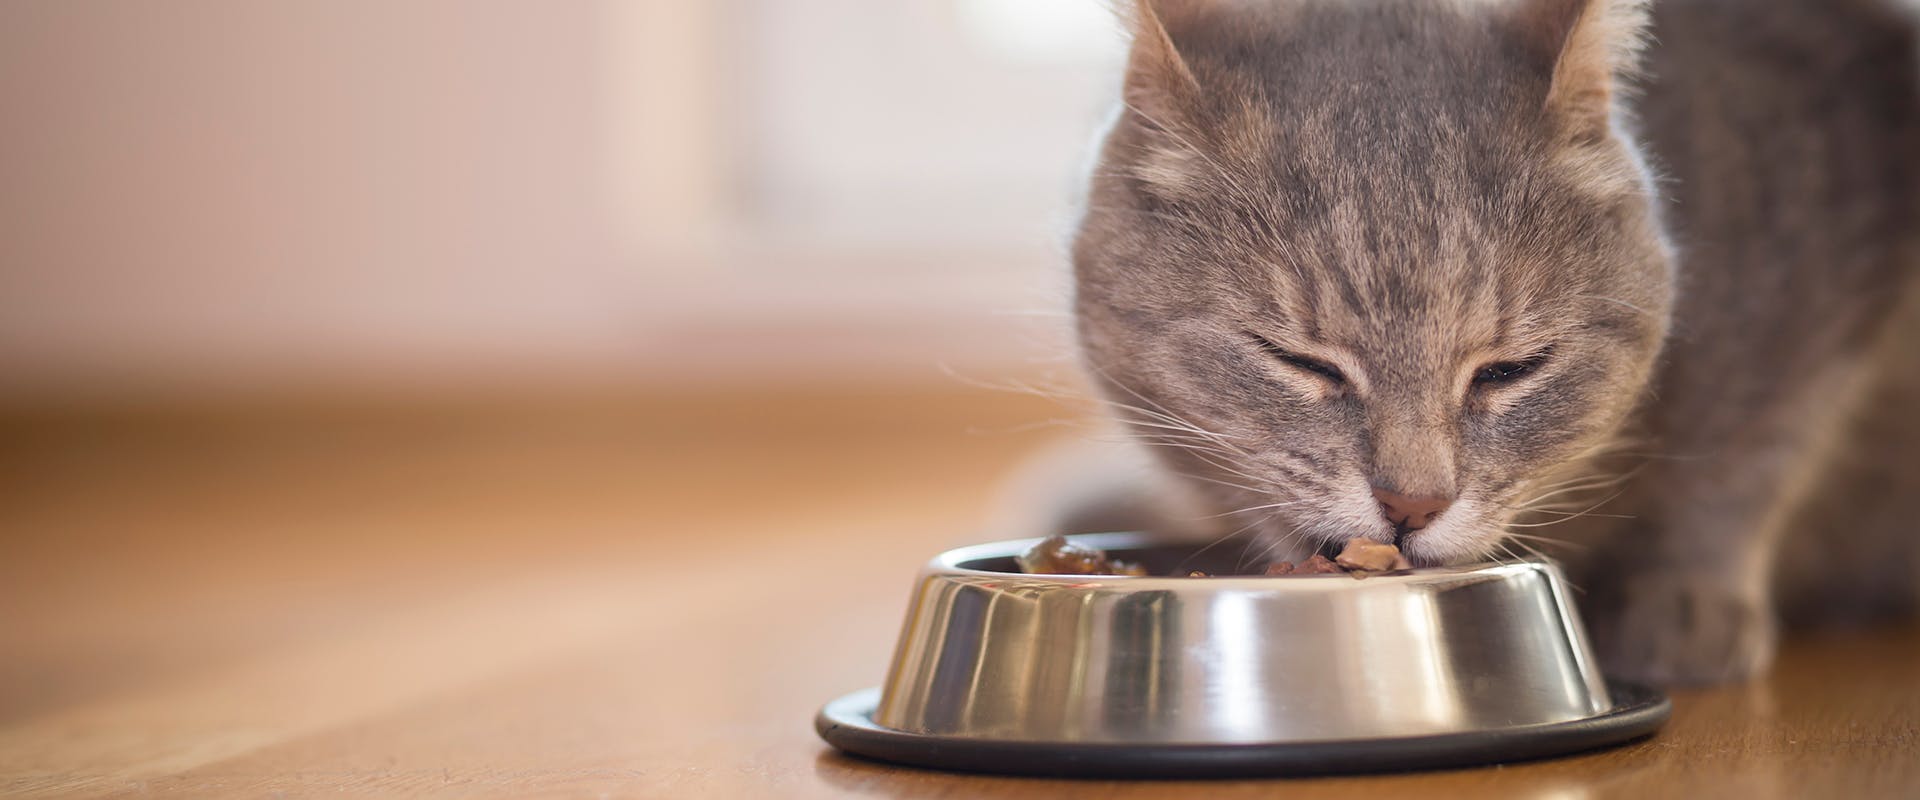 A cat eating from a stainless steel bowl